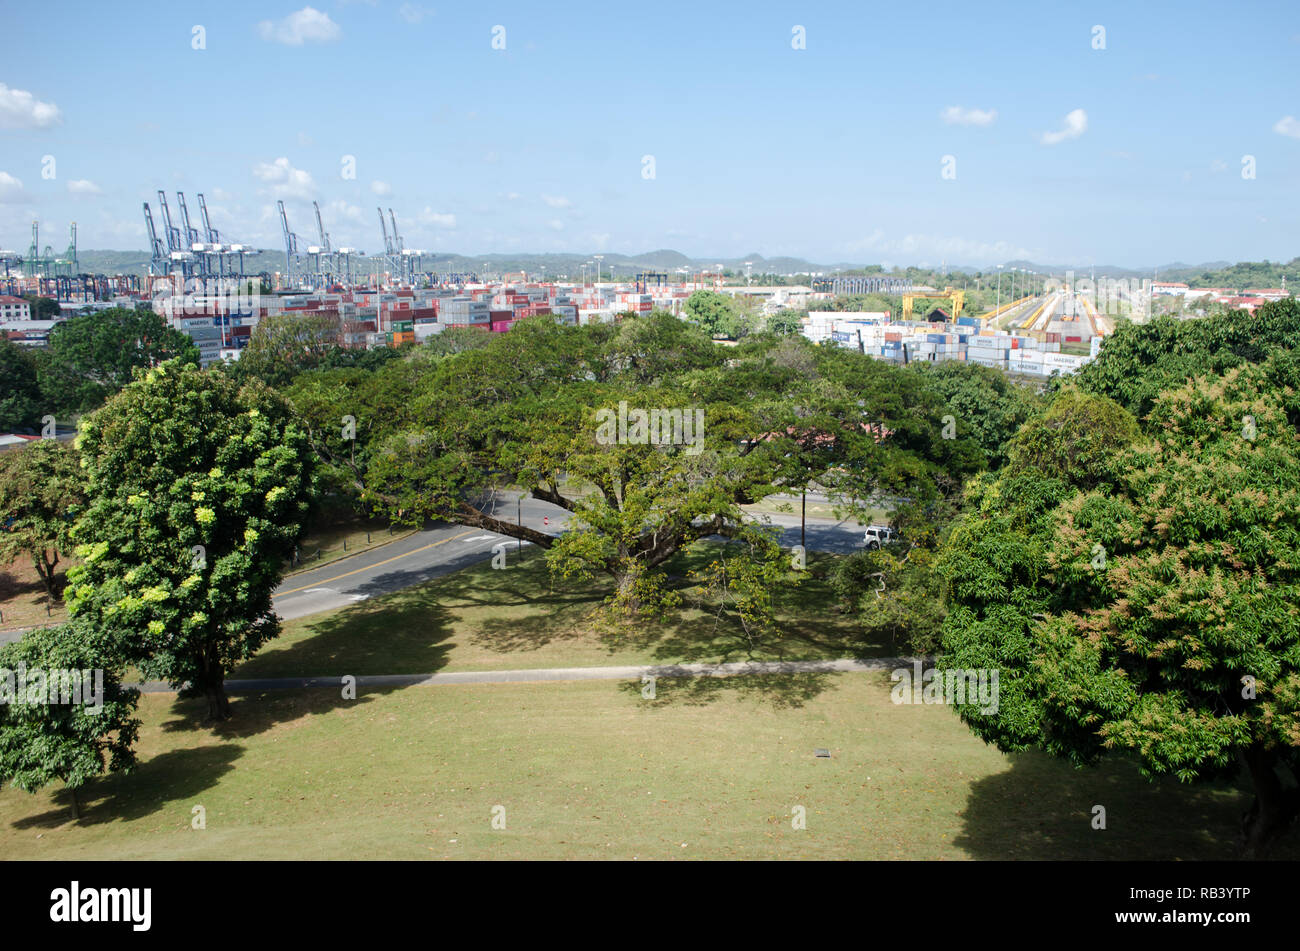 The port of Balboa area as seen from the Panama Canal Administration Building Stock Photo